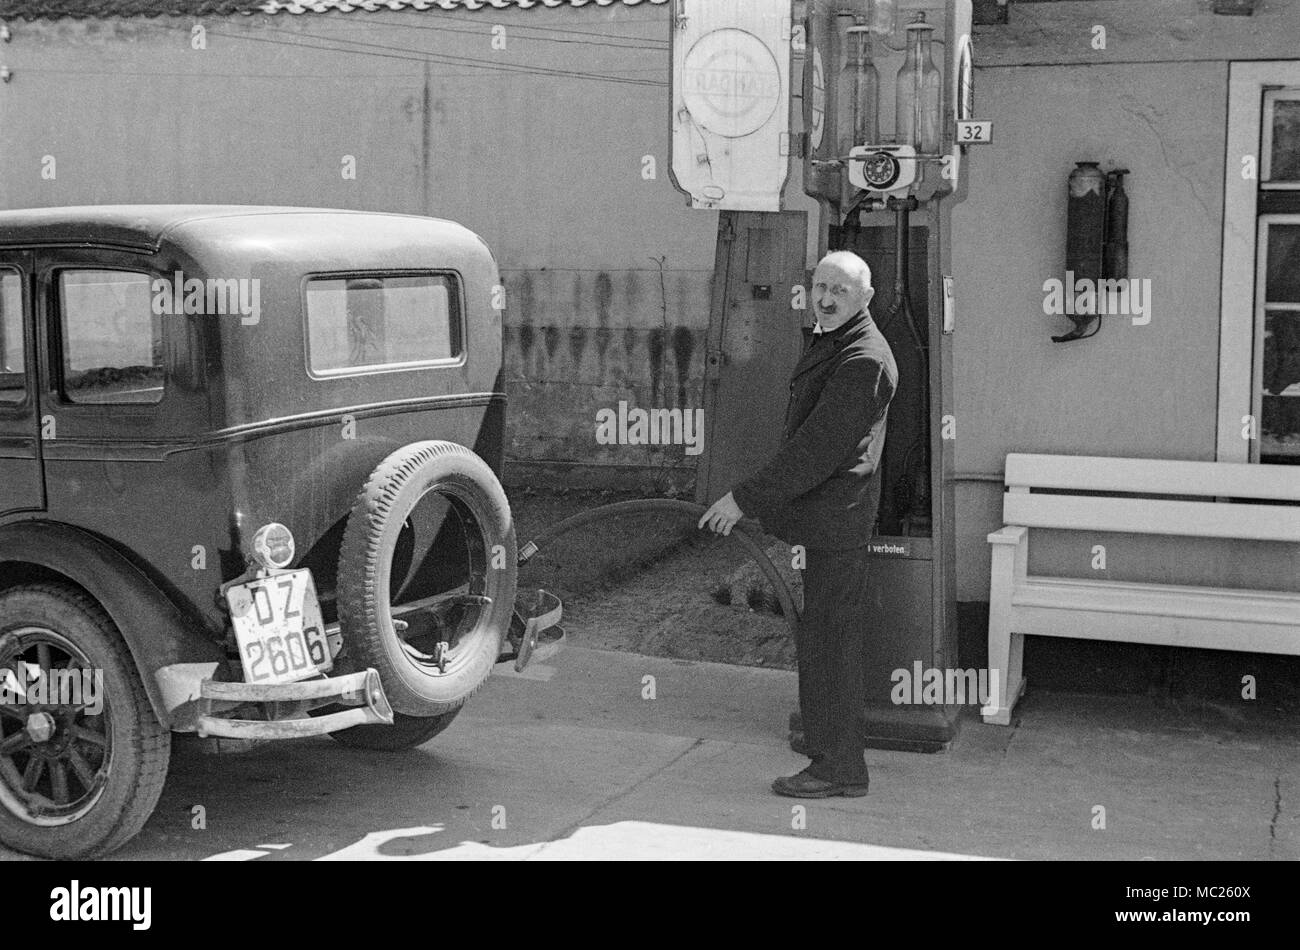 Photograph taken in 1934 in Germany showing a man filling his car with petrol. Vintage black and white photograph. Stock Photo